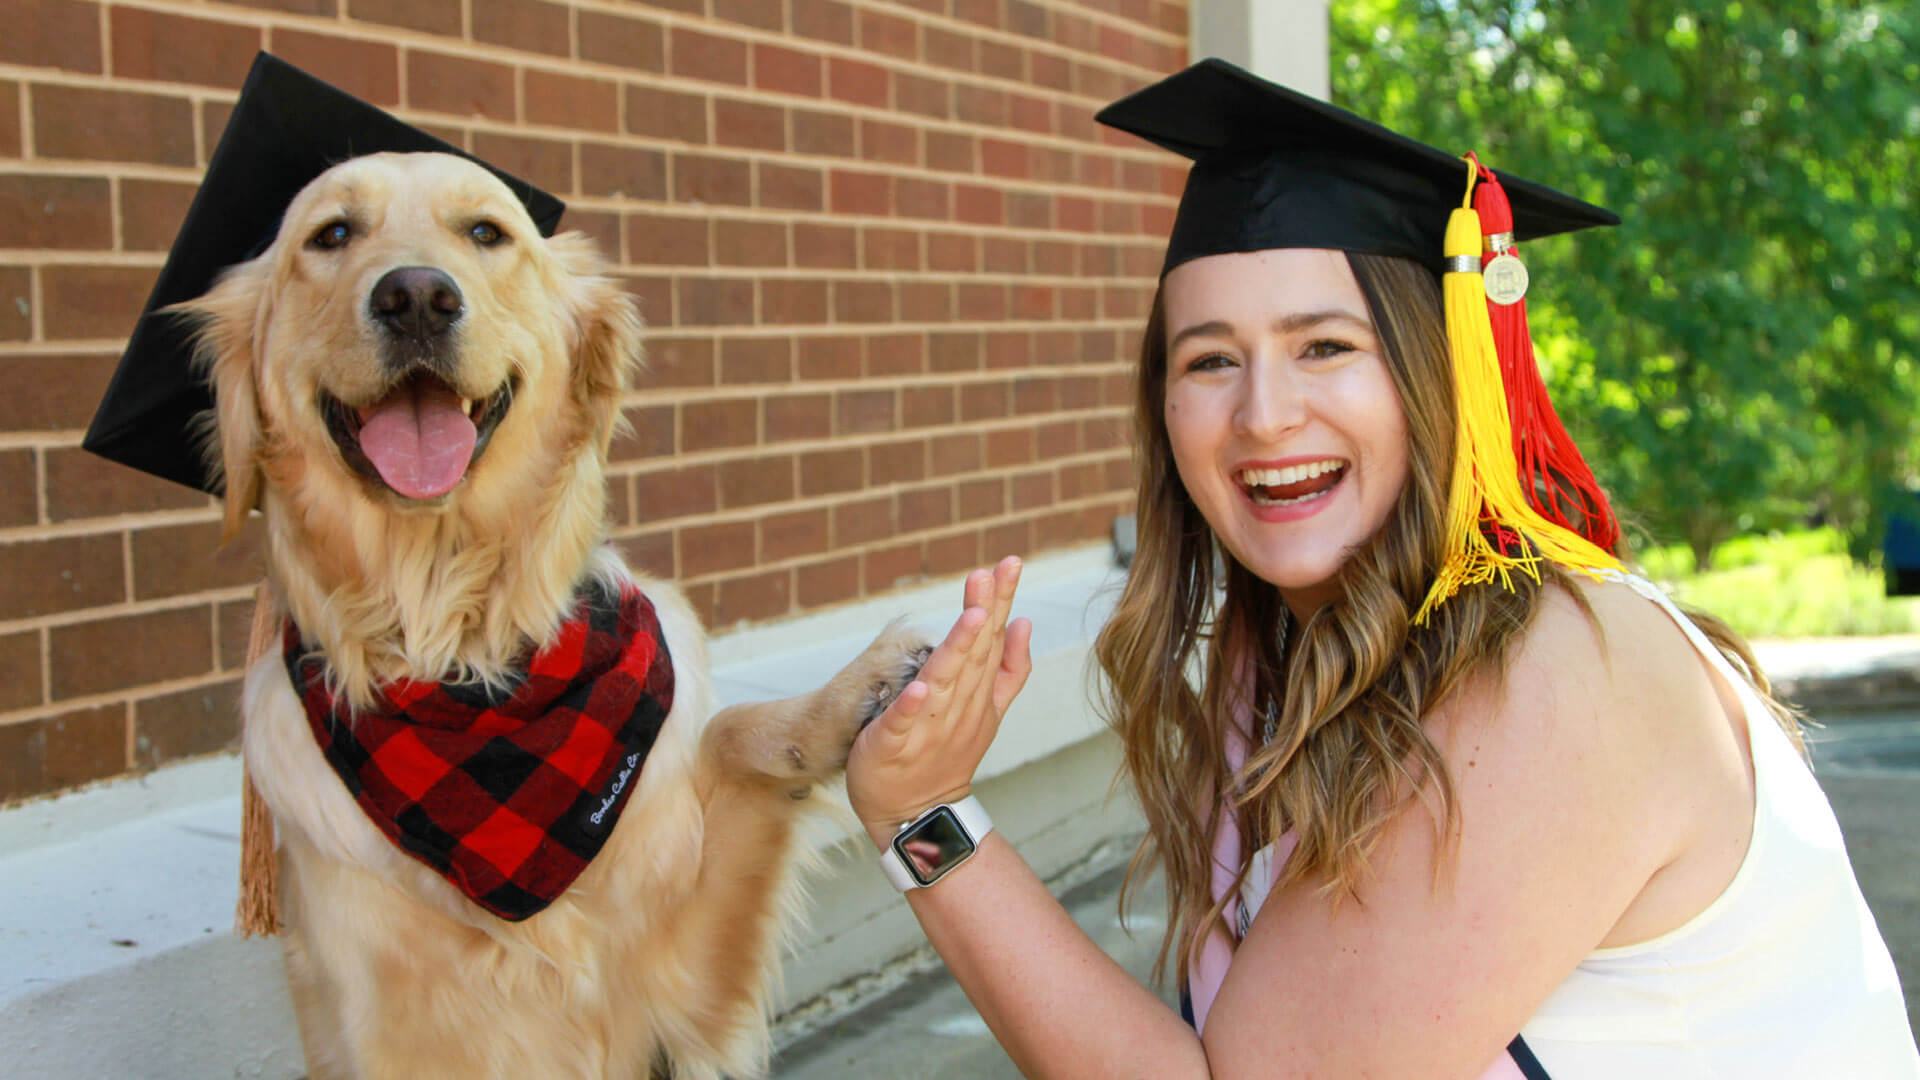 Abby Queen high-fives her dog, with both wearing graduation caps